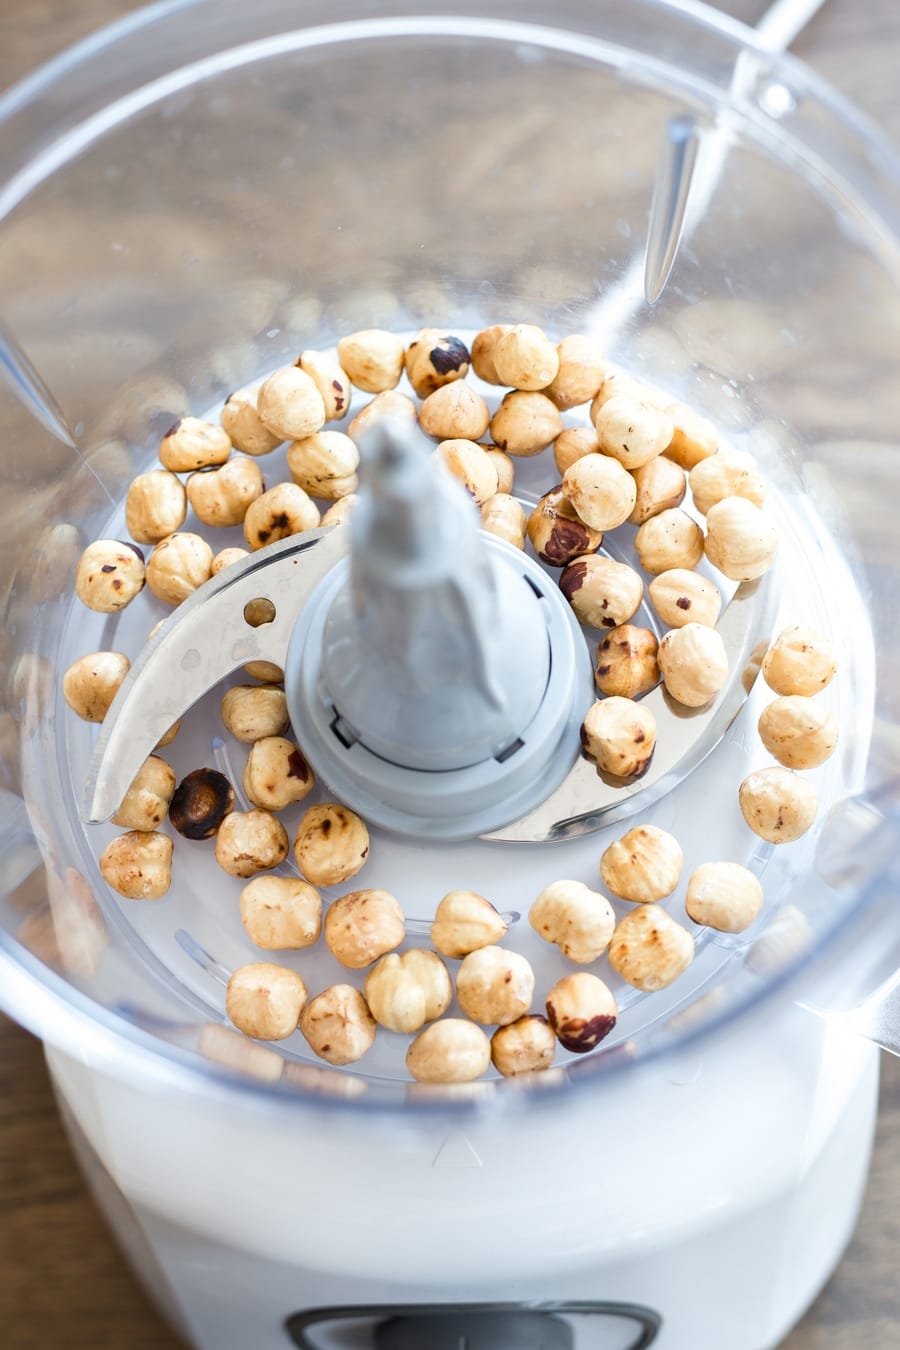 Toasted hazelnuts in a food processor.